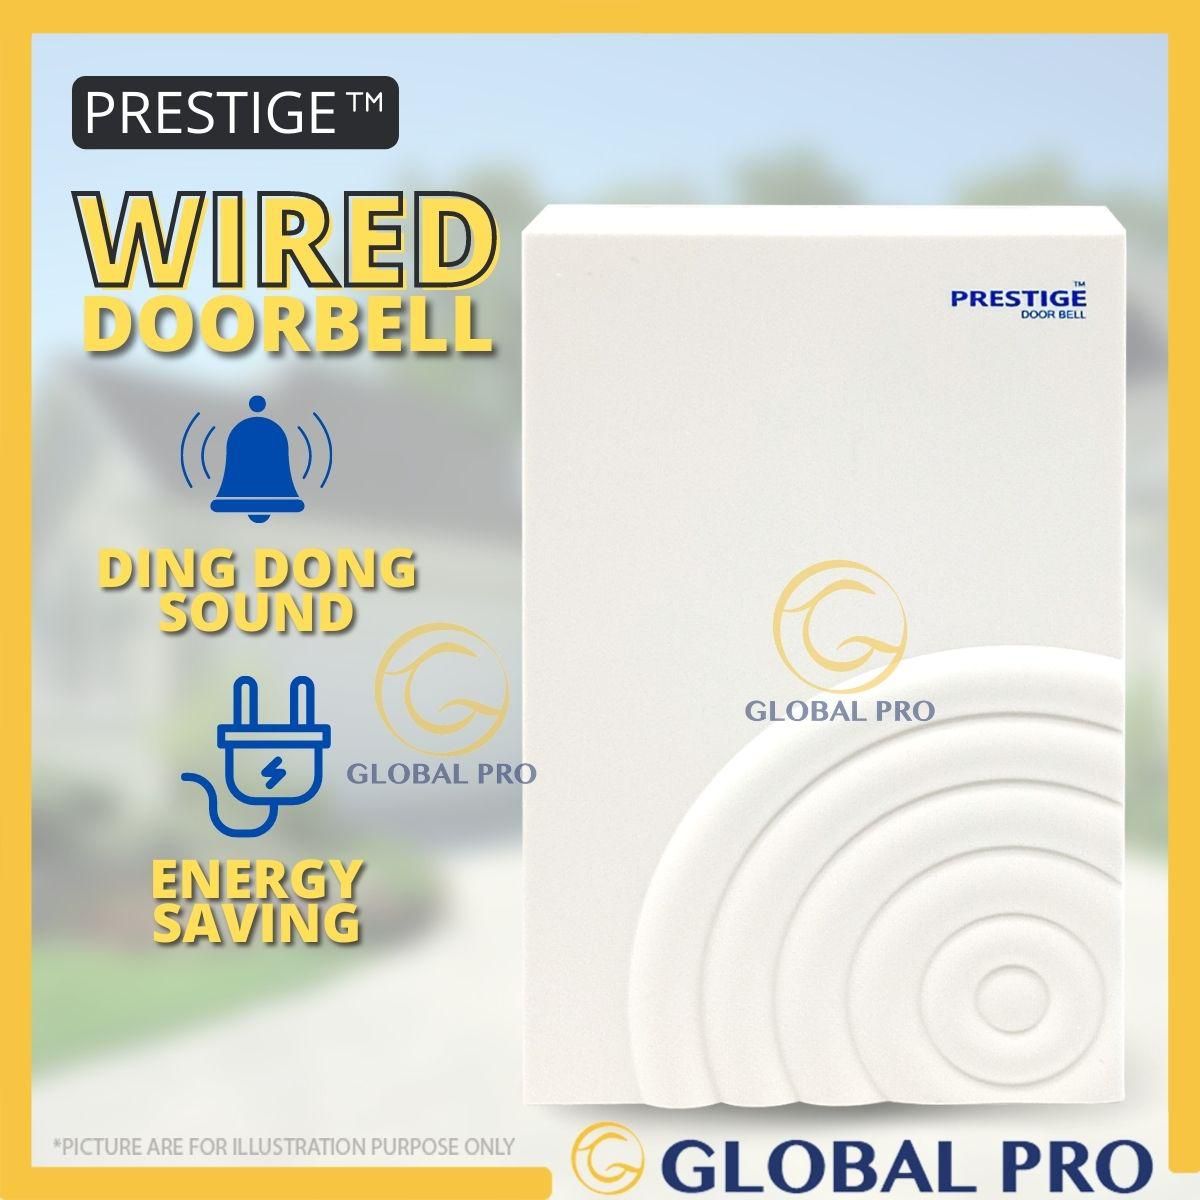 PRESTIGE Ding Dong Wired Doorbell Mechanical Striking Wired Door Bell Doorbell Chime Loceng Rumah